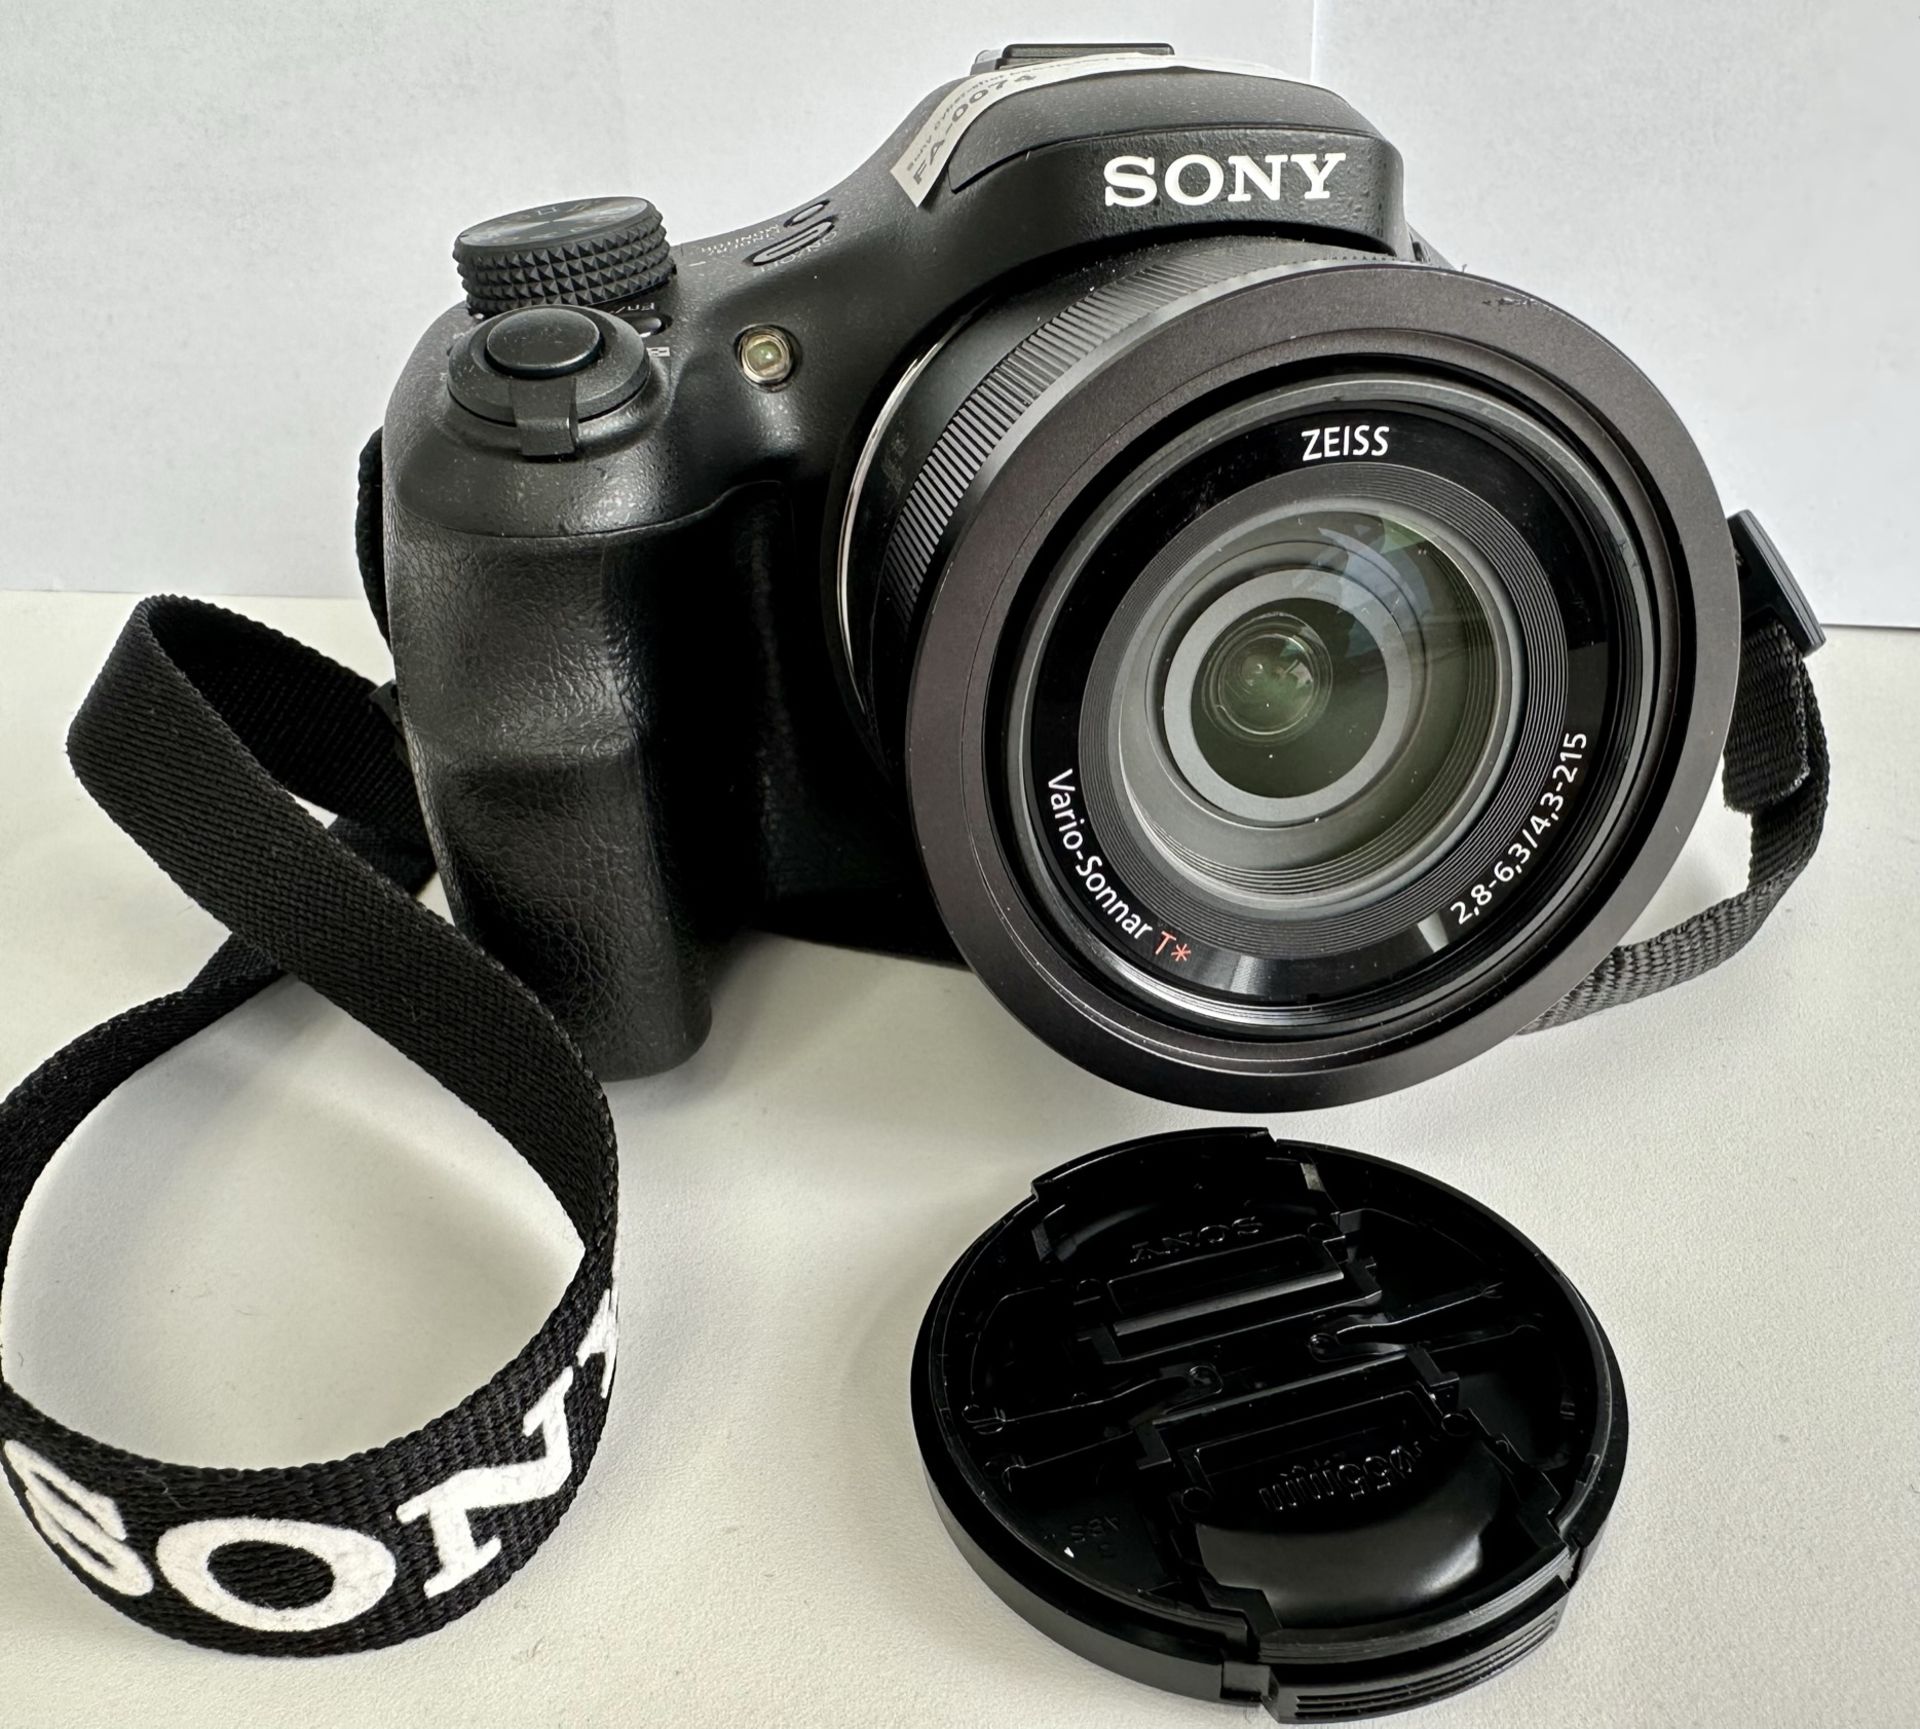 Sony Cyber-shot DSC-HX400V Compact Camera w/ Zeiss Vario-Sonnar T* Lens - Image 2 of 7